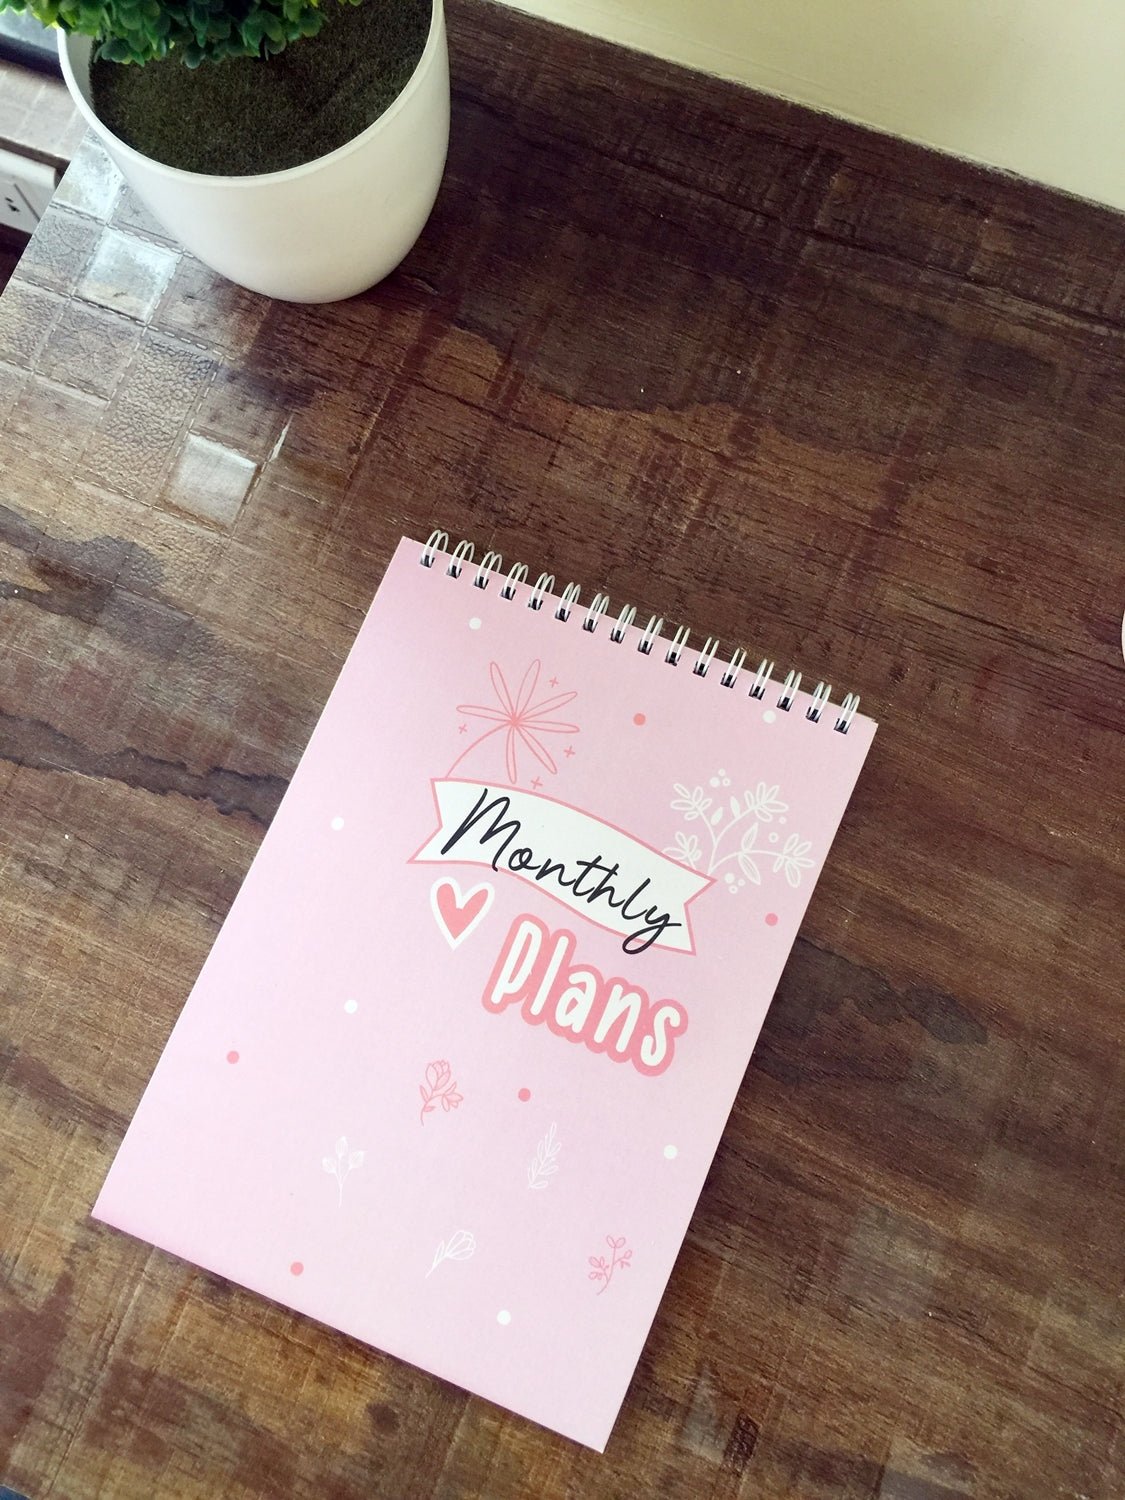 Lovely Bloomy Daily/ Weekly/Monthly Planners | Spiral A5 Size | 50 sheets each - Supple Room